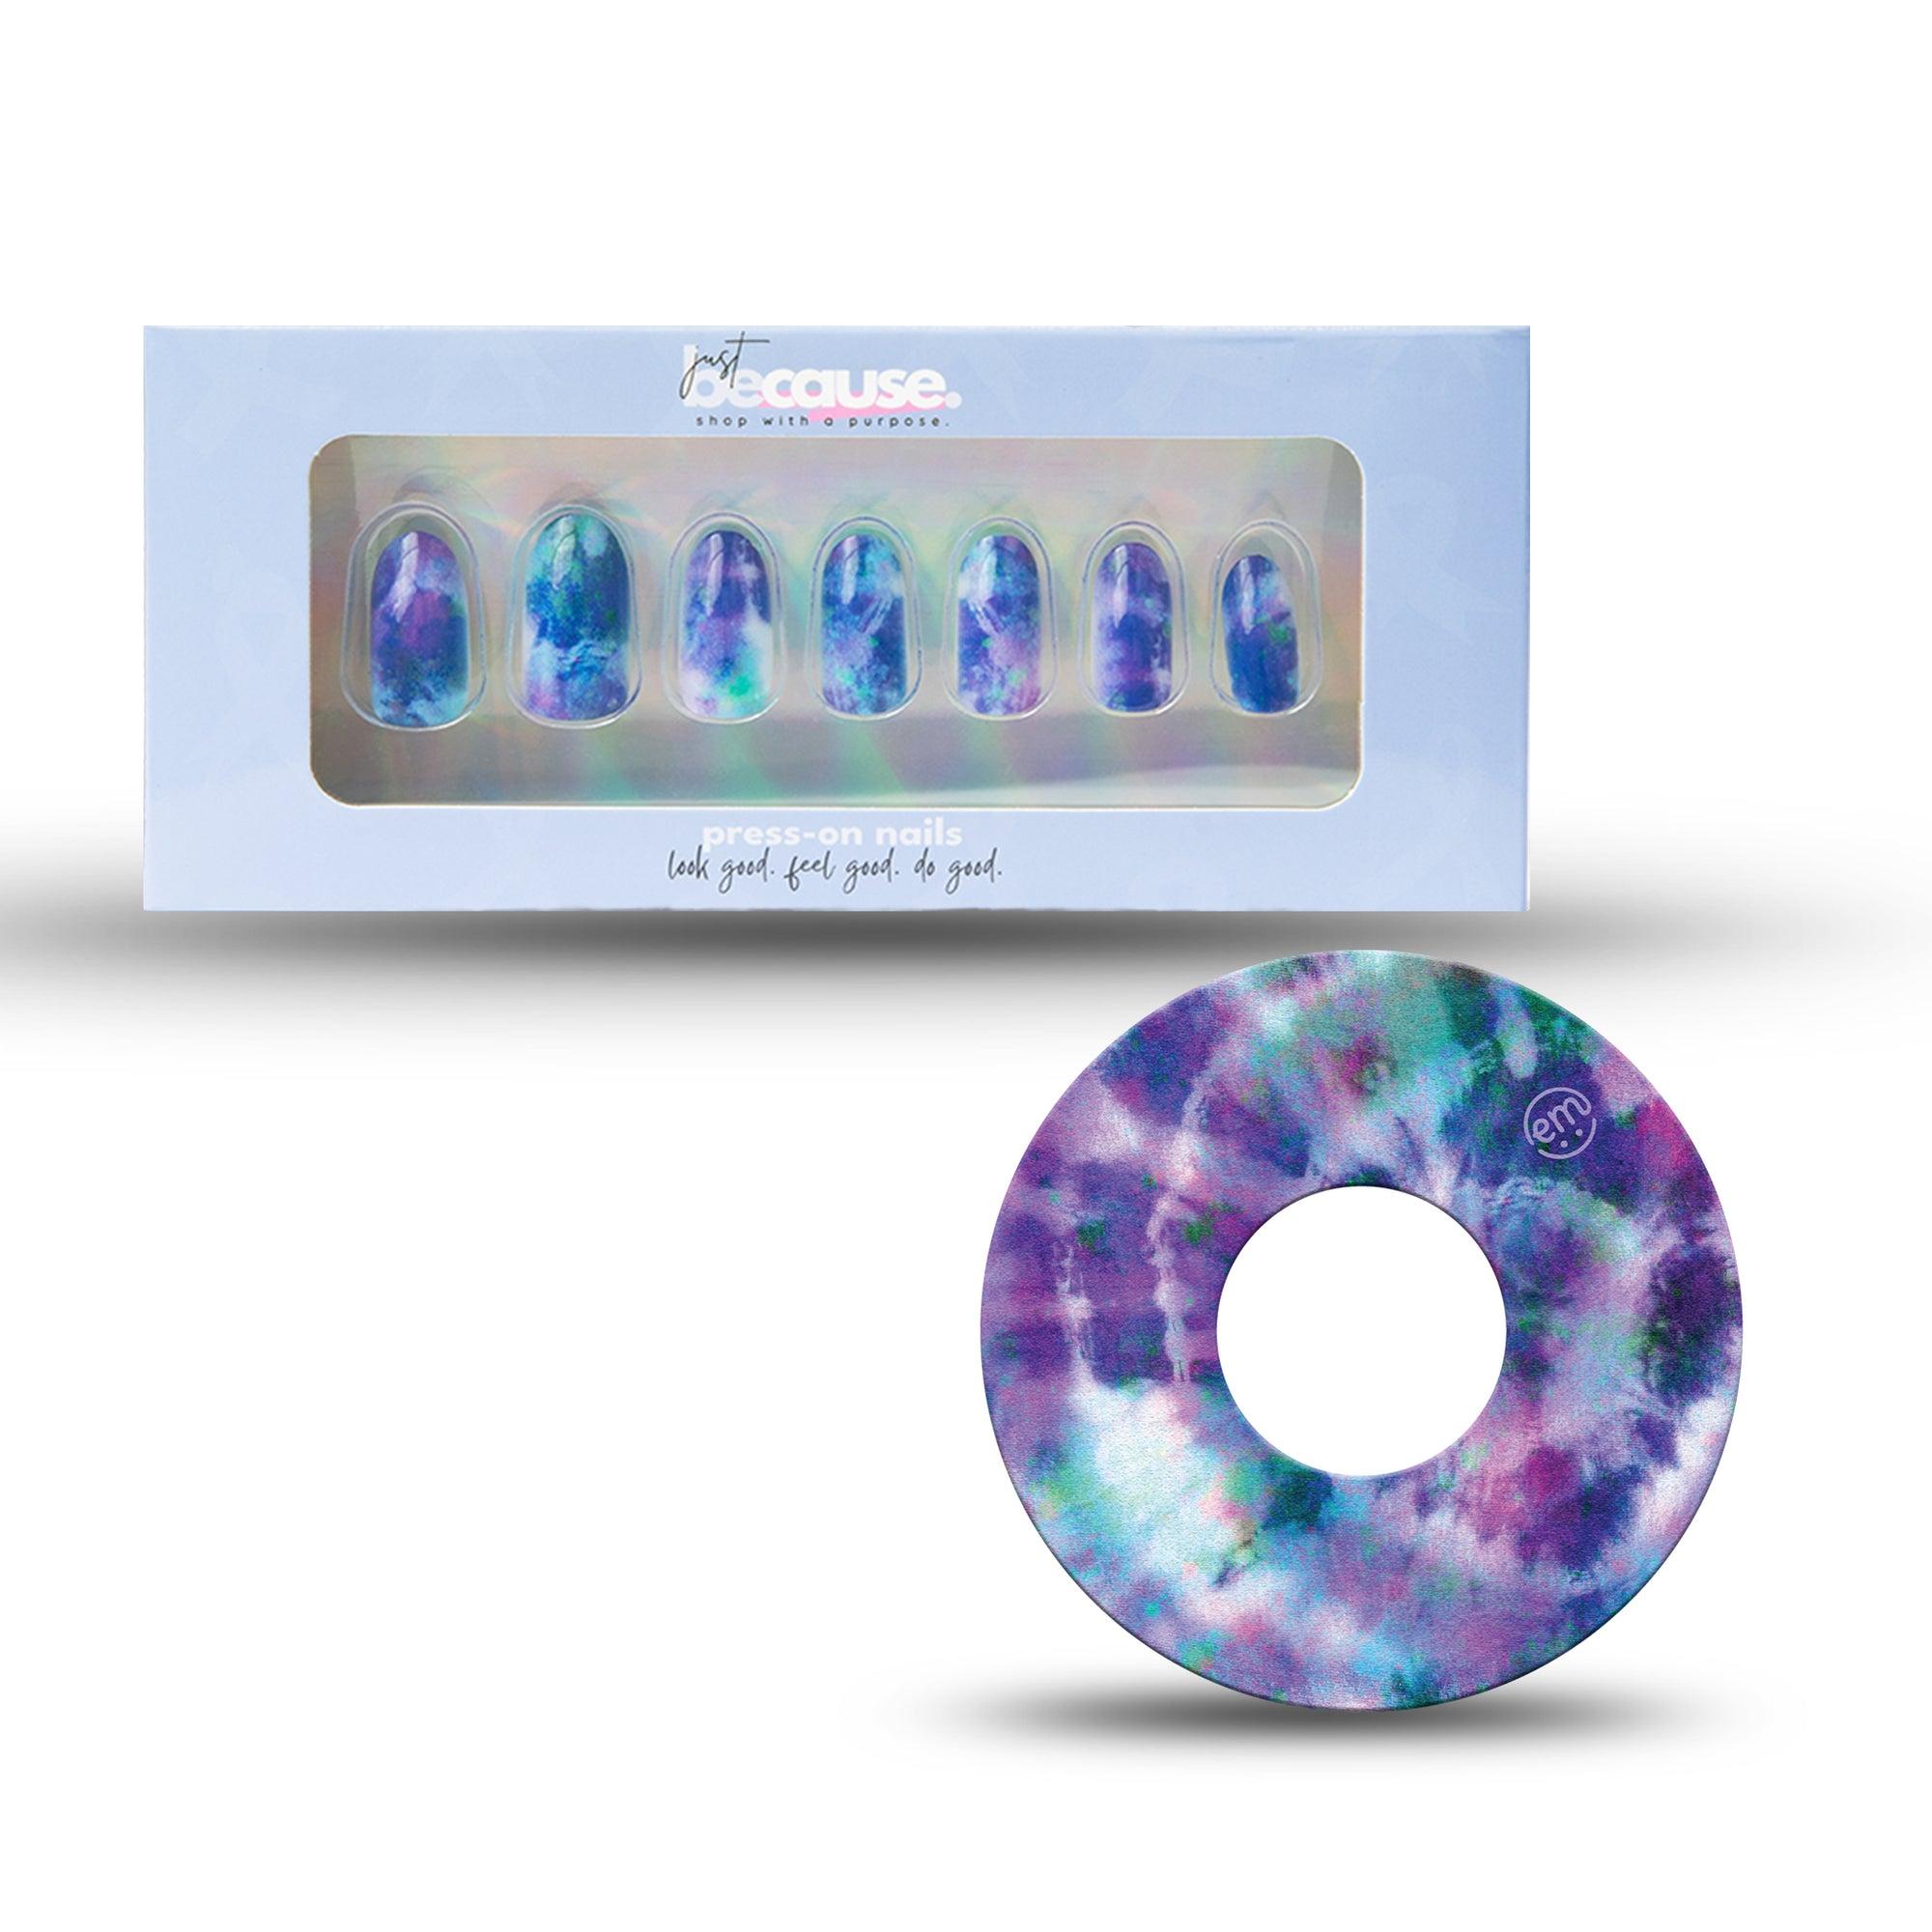 ExpressionMed Just BeCause 24 Pcs ABS Press on nails Medium, Purple and Blue Tie Dye Fake Nails set with matching Purple Tie Dye Omnipod Overlay Adhesive Tape and Center Sticker, Support T1D - ExpressionMed.com	